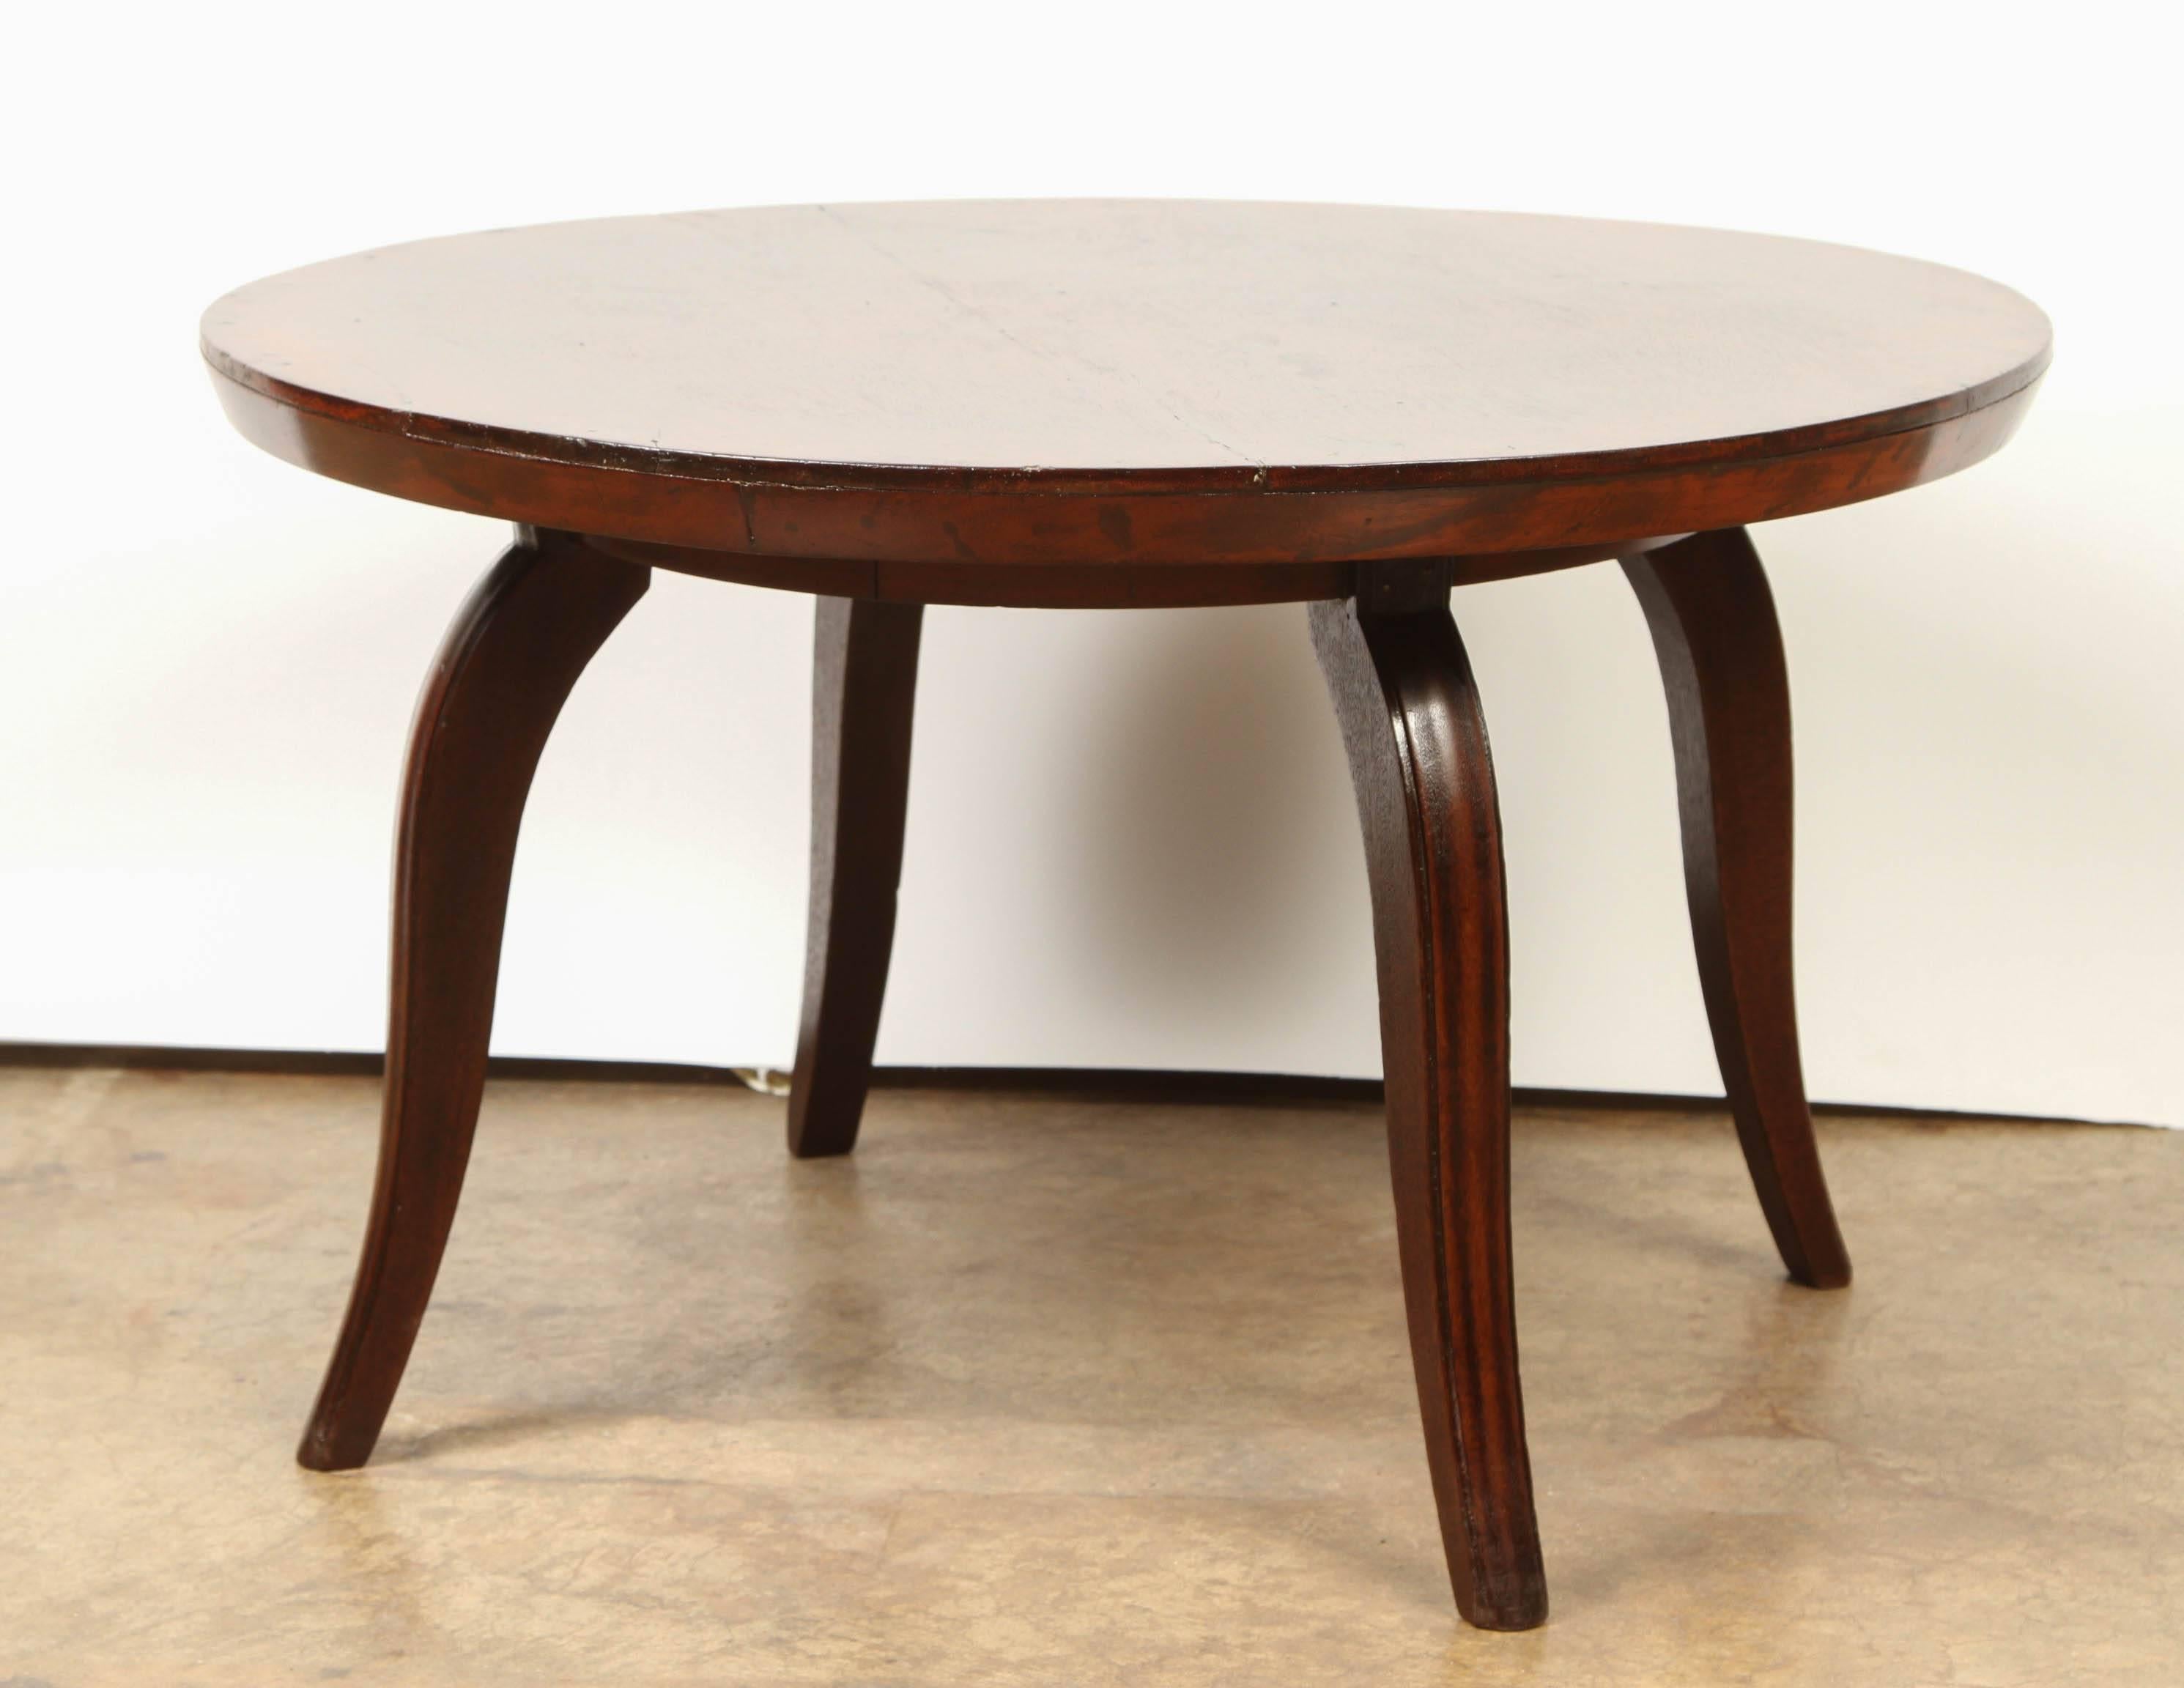 French Colonial Art Deco coffee table in solid Rosewood, with a thin apron and four splayed legs.